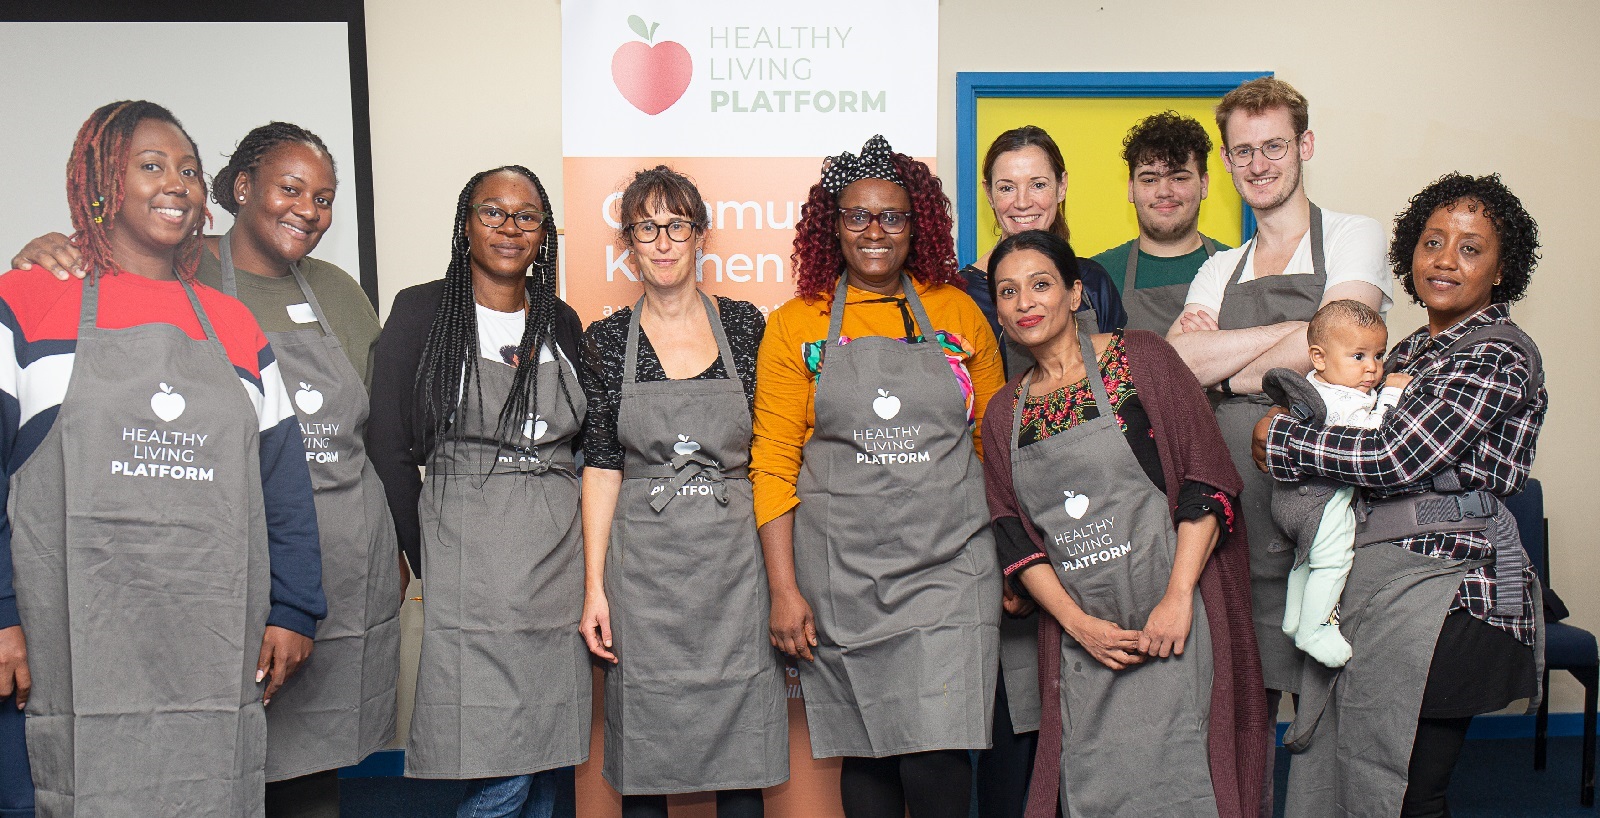 Healthy Living Platform, Living Wage employers